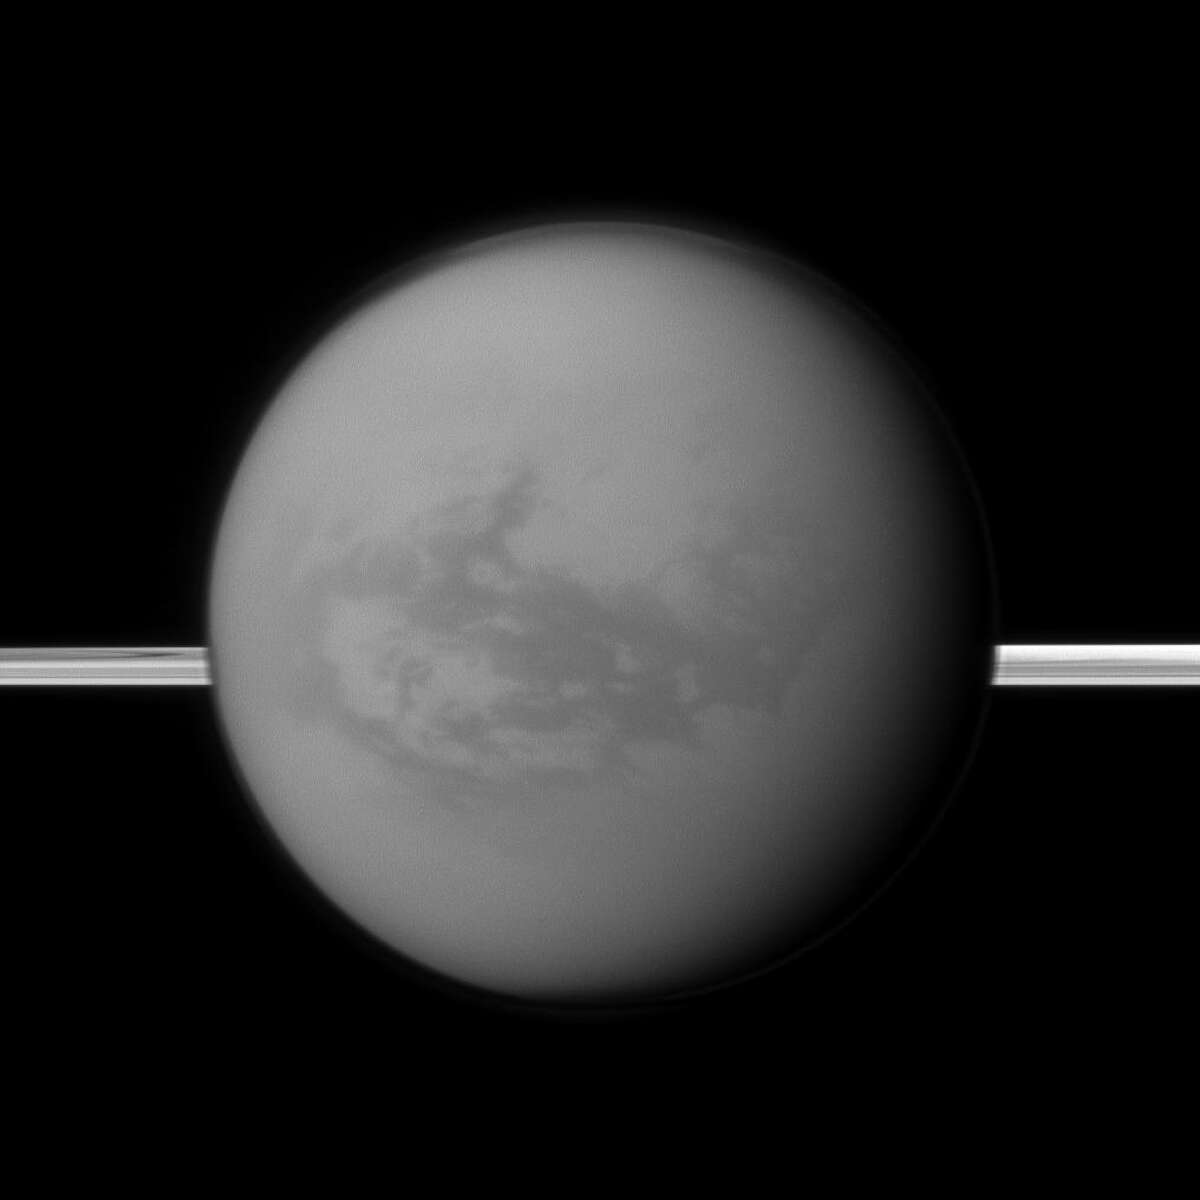 This image shows Titan with Saturn’s rings in the background. Titan holds liquid, has clouds and experiences rain. But unlike Earth, Titan’s bodies of liquid contain methane, not water, according to NASA.